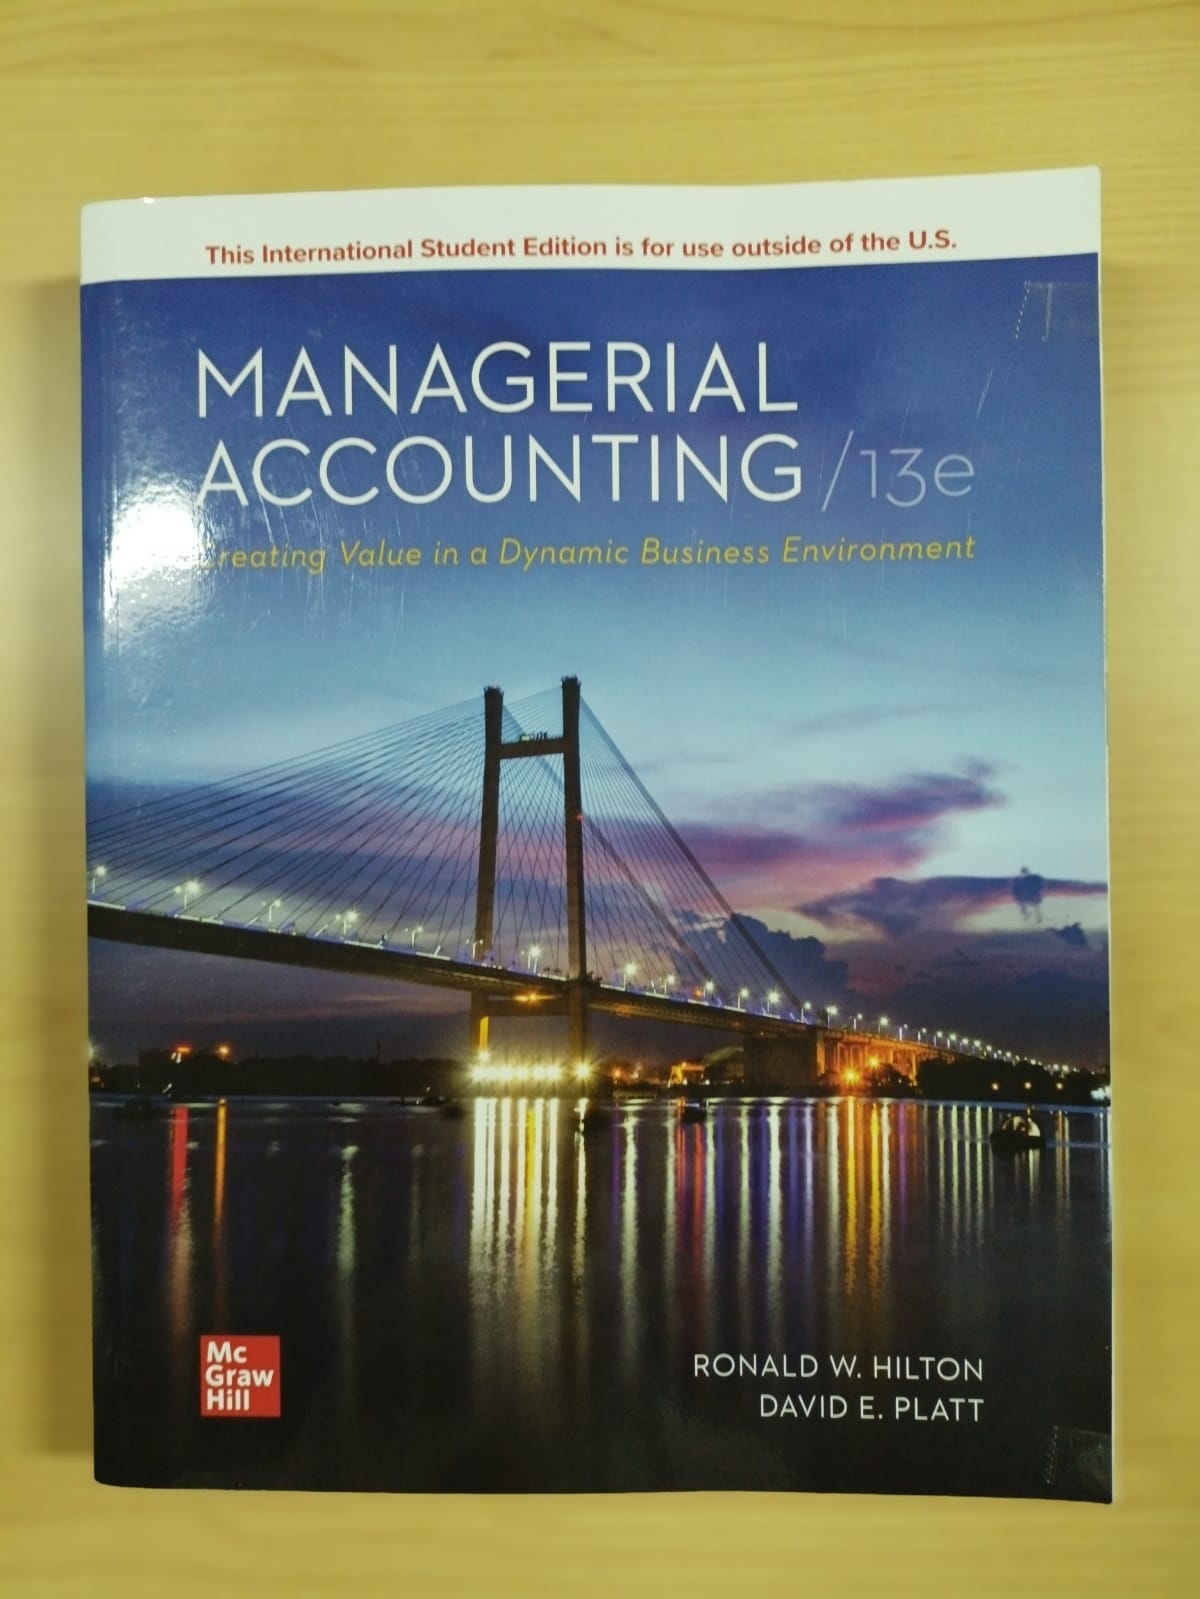 Managerial accounting: creating value in a dynamic business environment13th edition